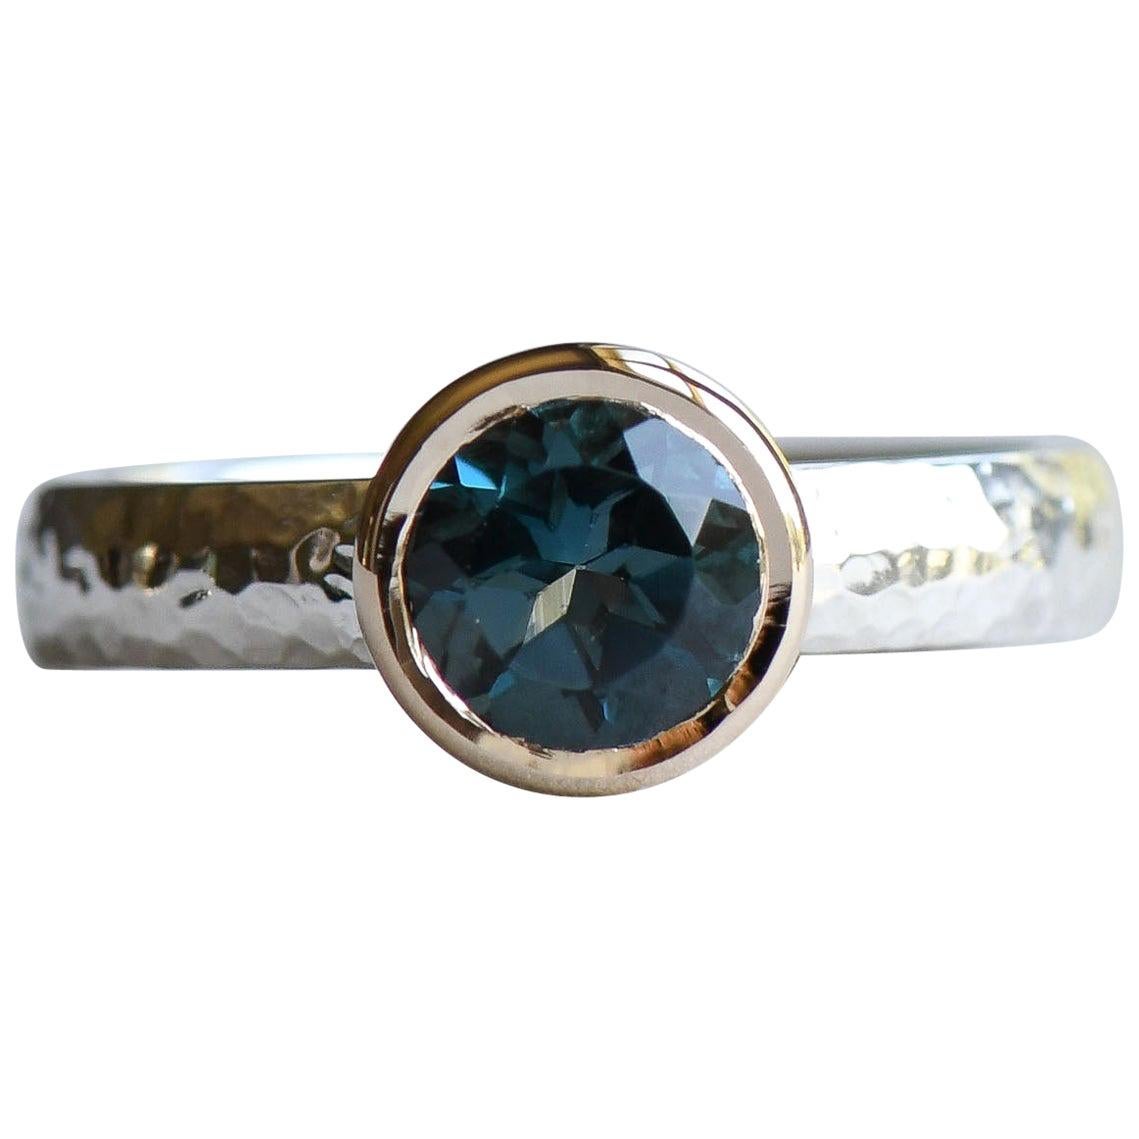 Two Tone Hammered Ring, London Topaz Ring, 14k Bezel Gold with Sterling Silver